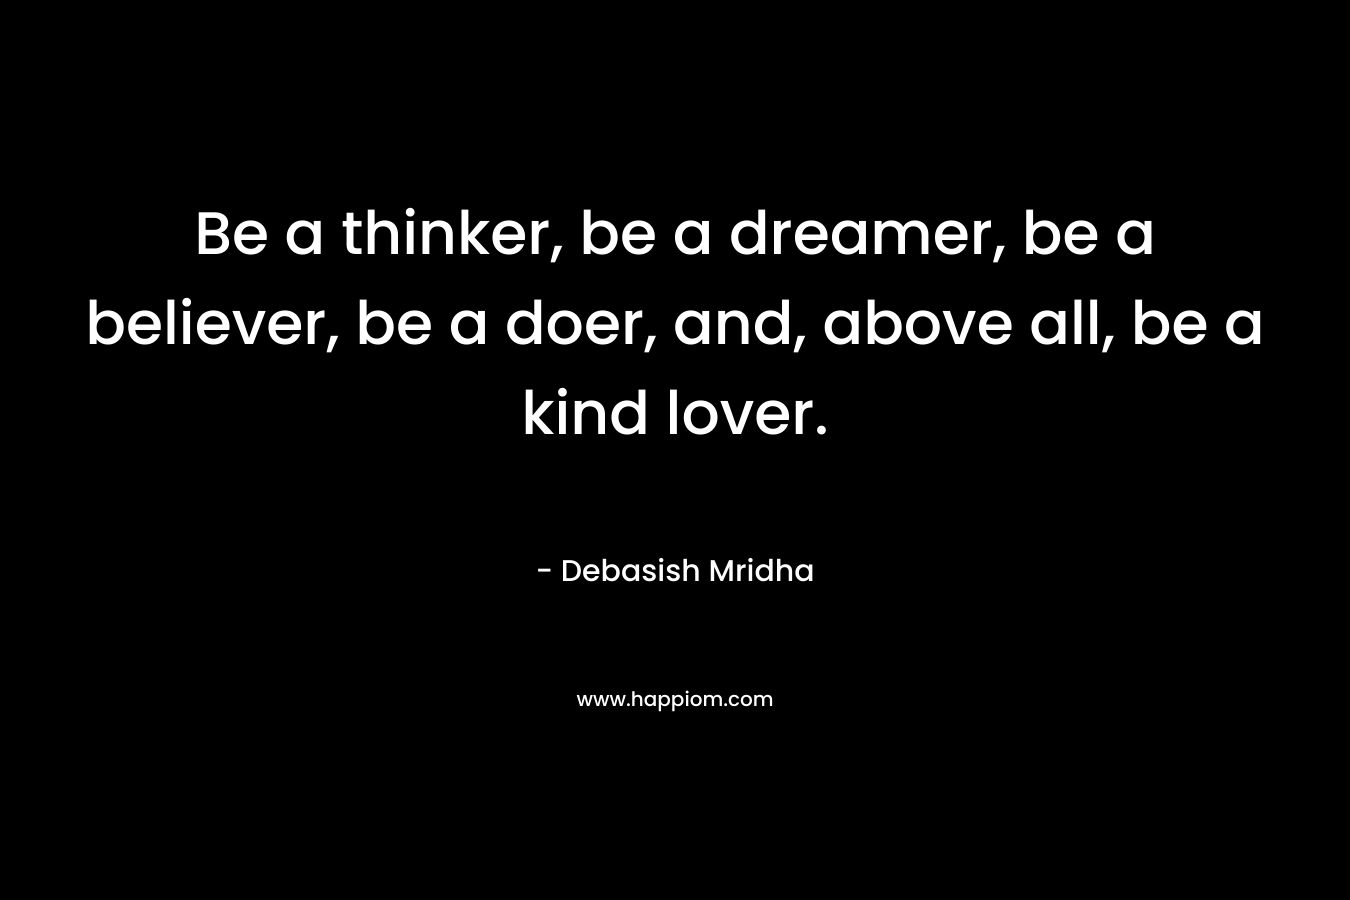 Be a thinker, be a dreamer, be a believer, be a doer, and, above all, be a kind lover. – Debasish Mridha